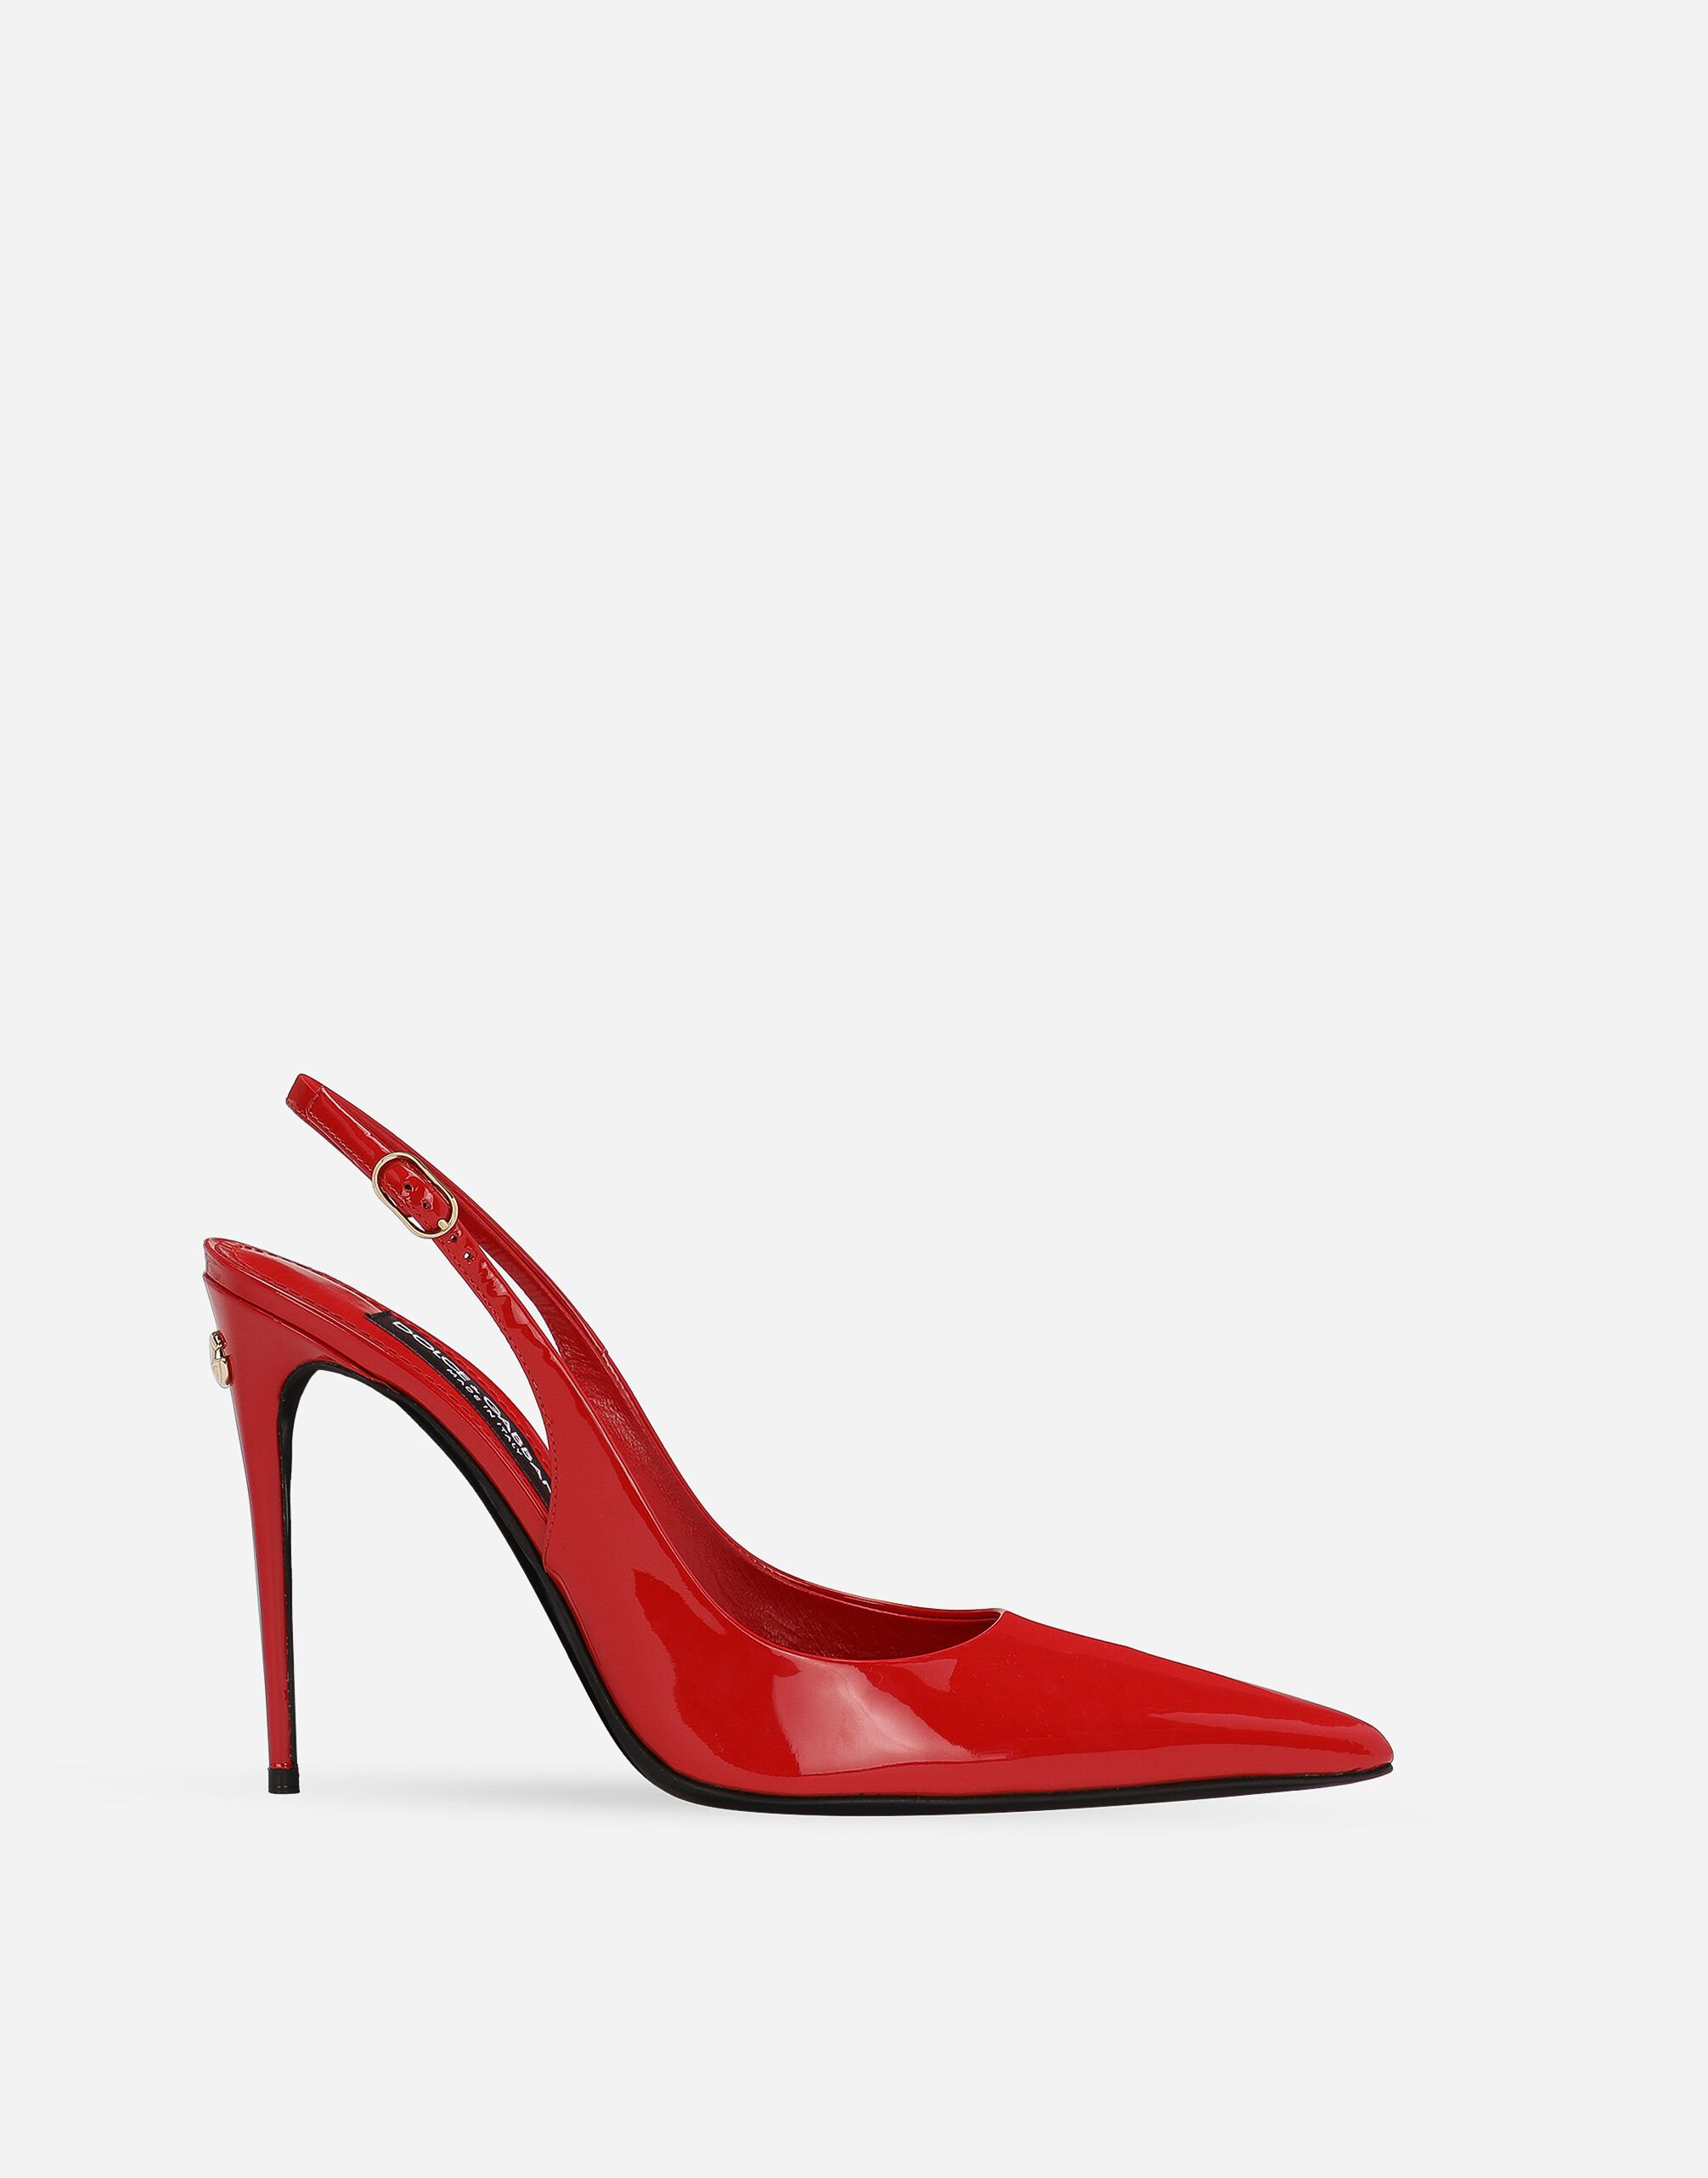 Dolce&Gabbana Patent leather slingbacks Red CG0602A1471